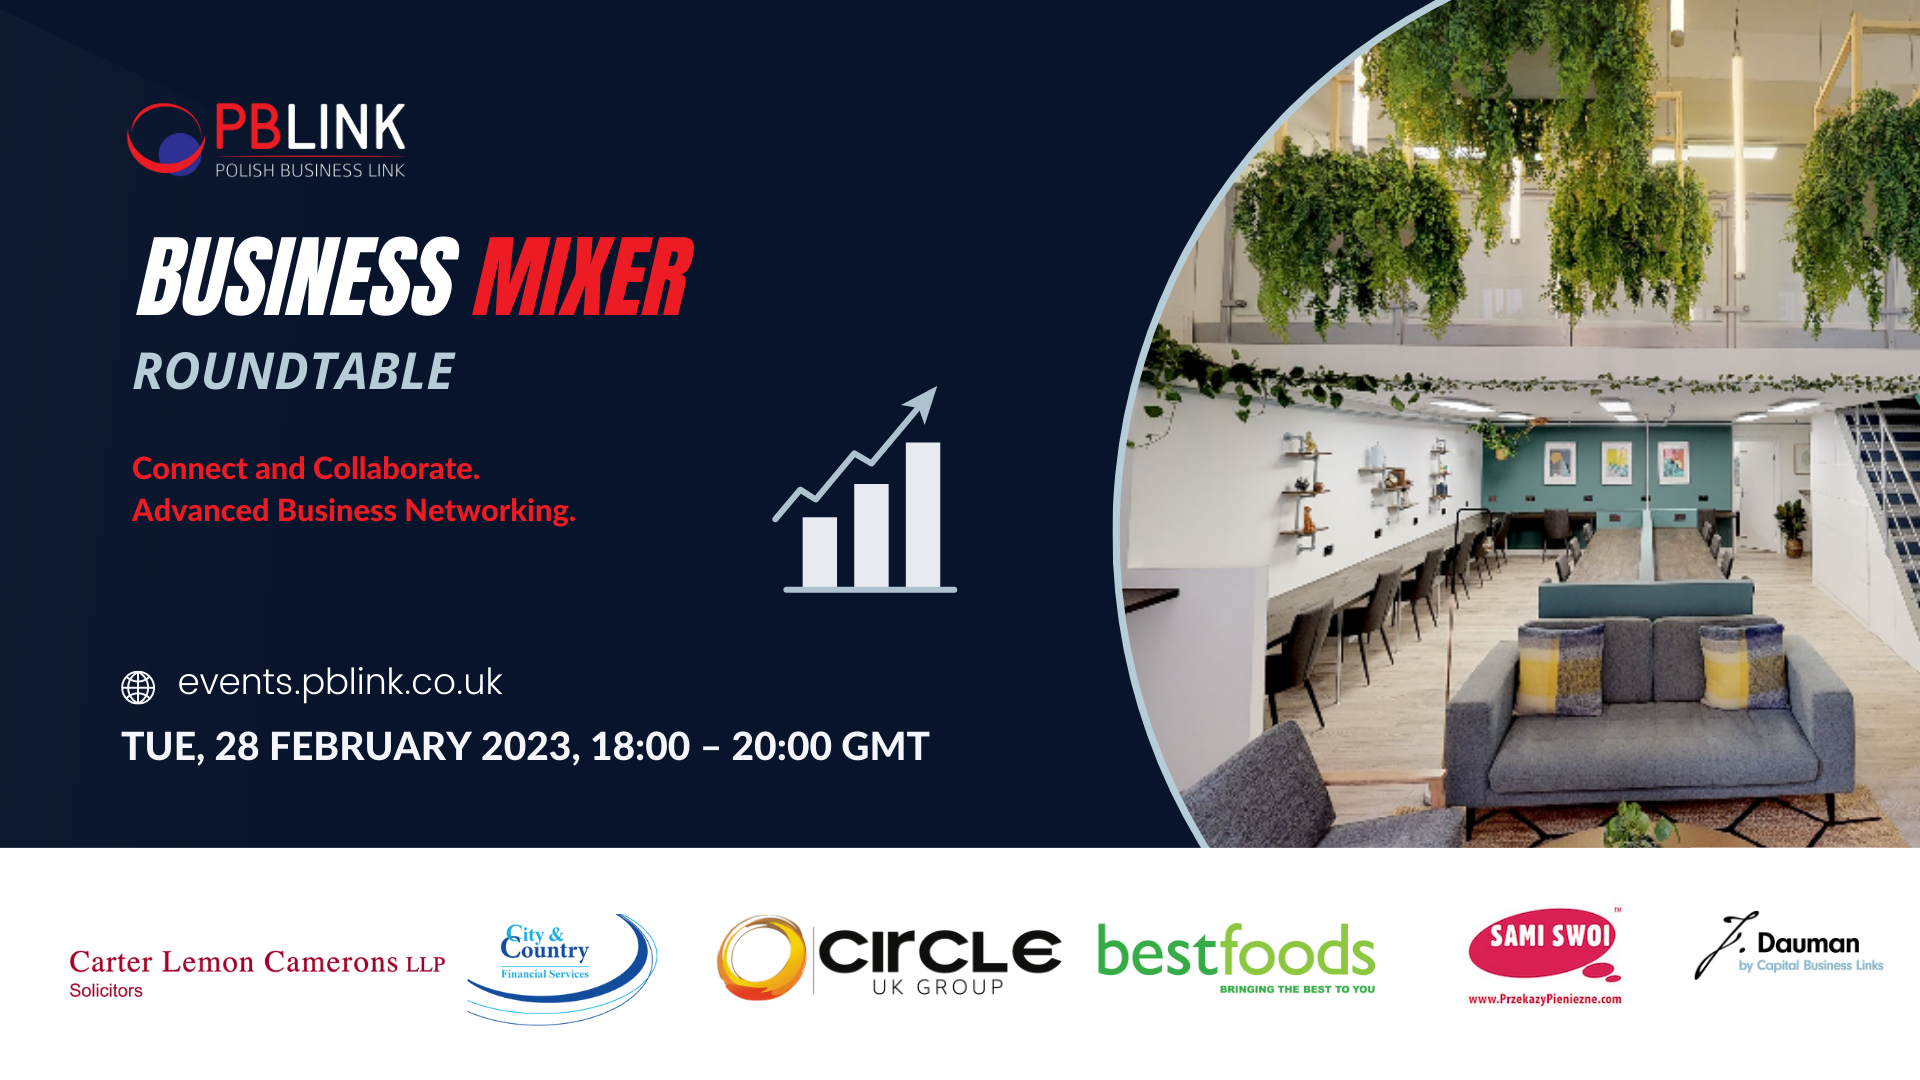 PBLINK Business Mixer - Roundtable 28.02.23